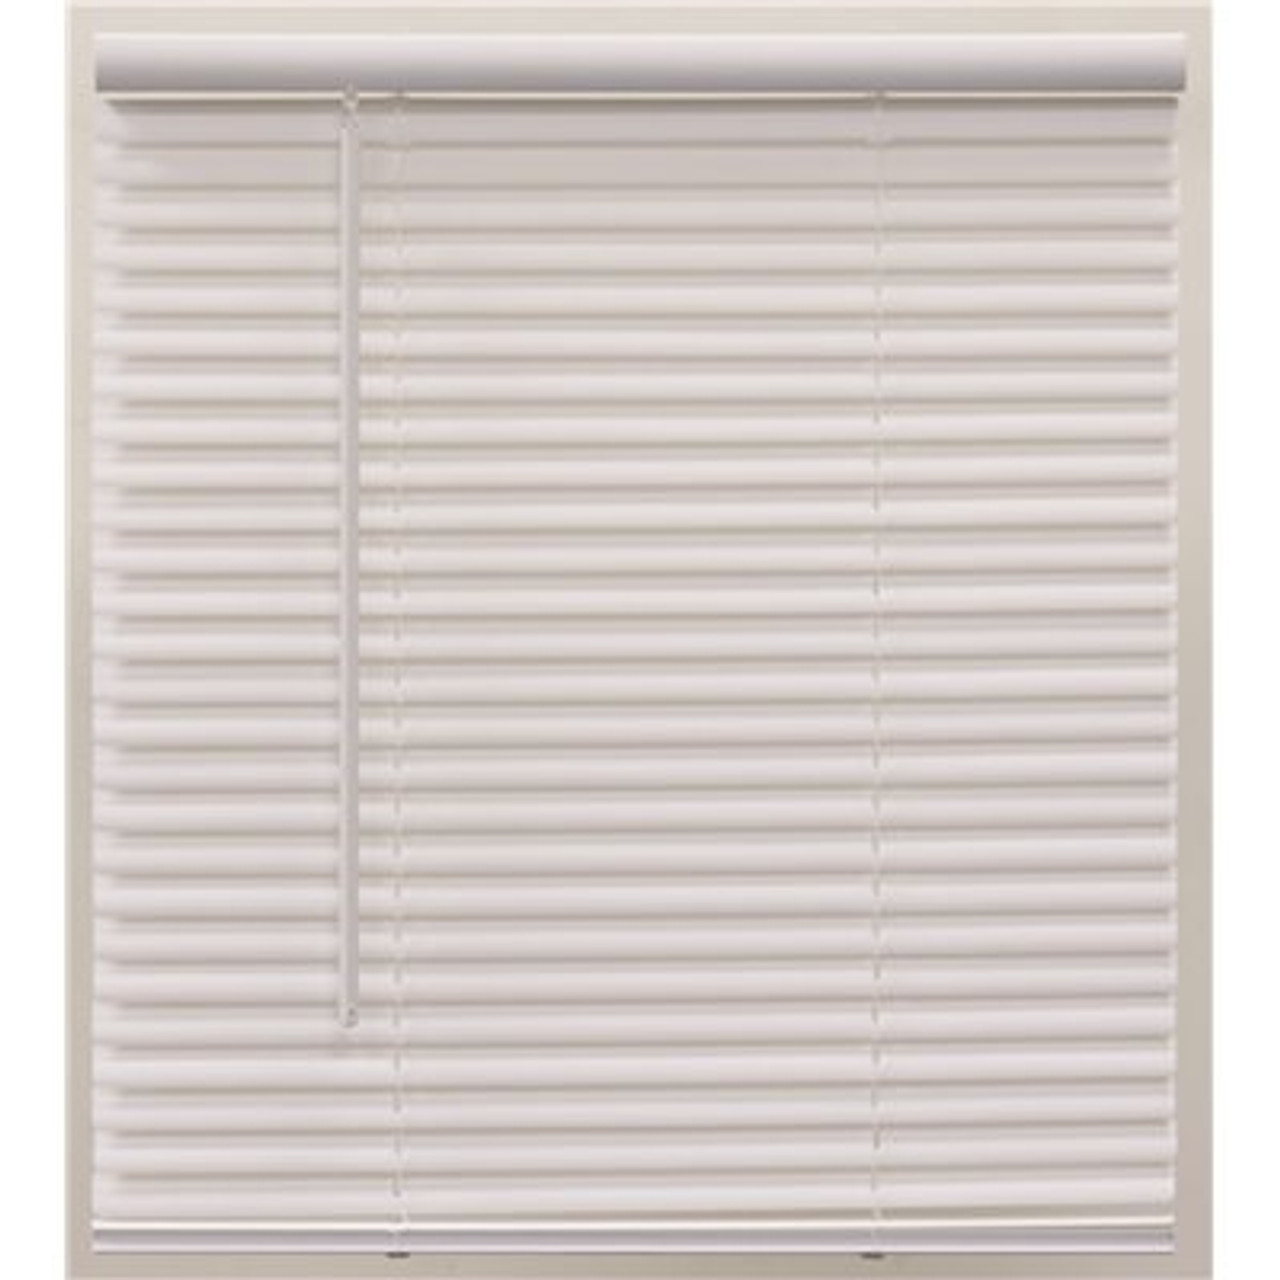 Champion Pre-Cut 37 in. W x 72 in. L White Cordless Light Filtering Vinyl Mini Blind with 1 in. Slats